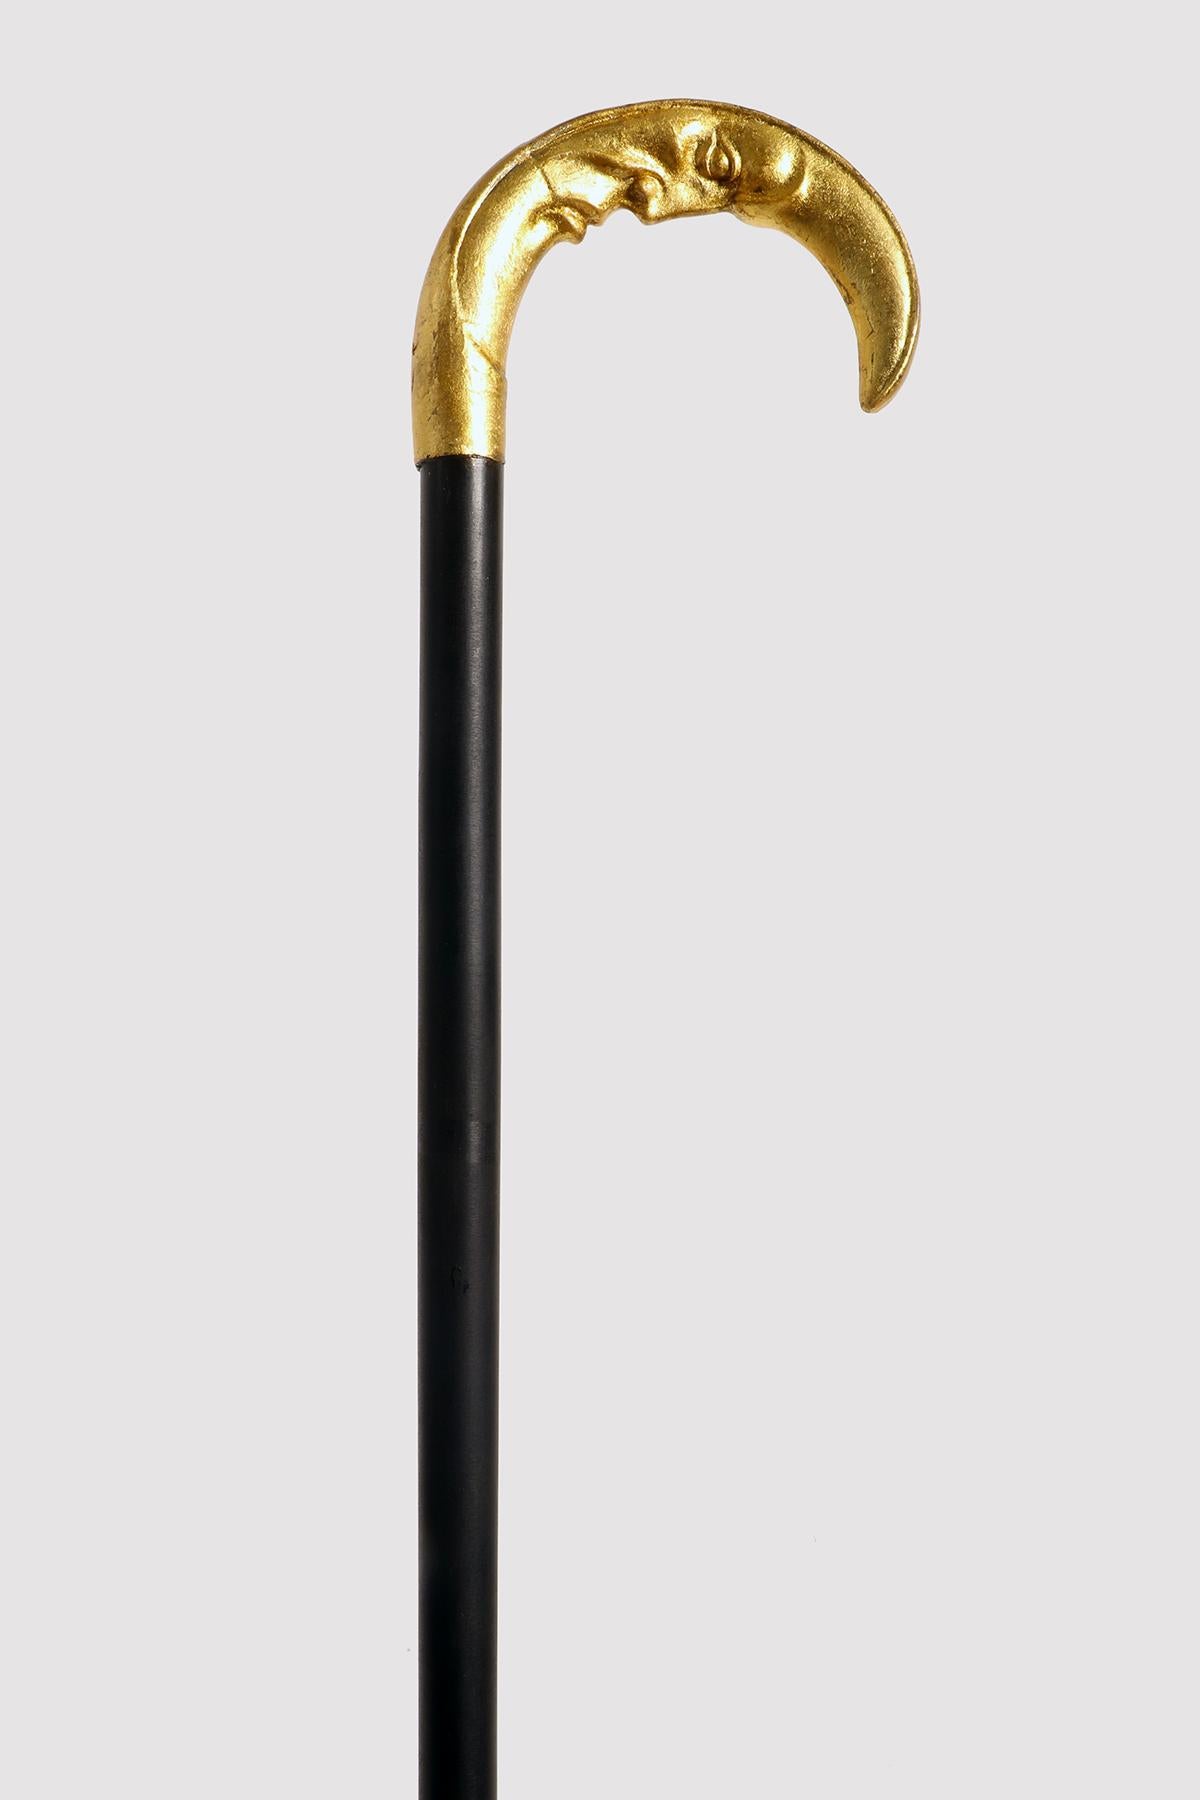 Walking stick: gold foil finished silver knob depicting a crescent moon with a human face. Ebony wood shaft. Metal tip. France circa 1900.